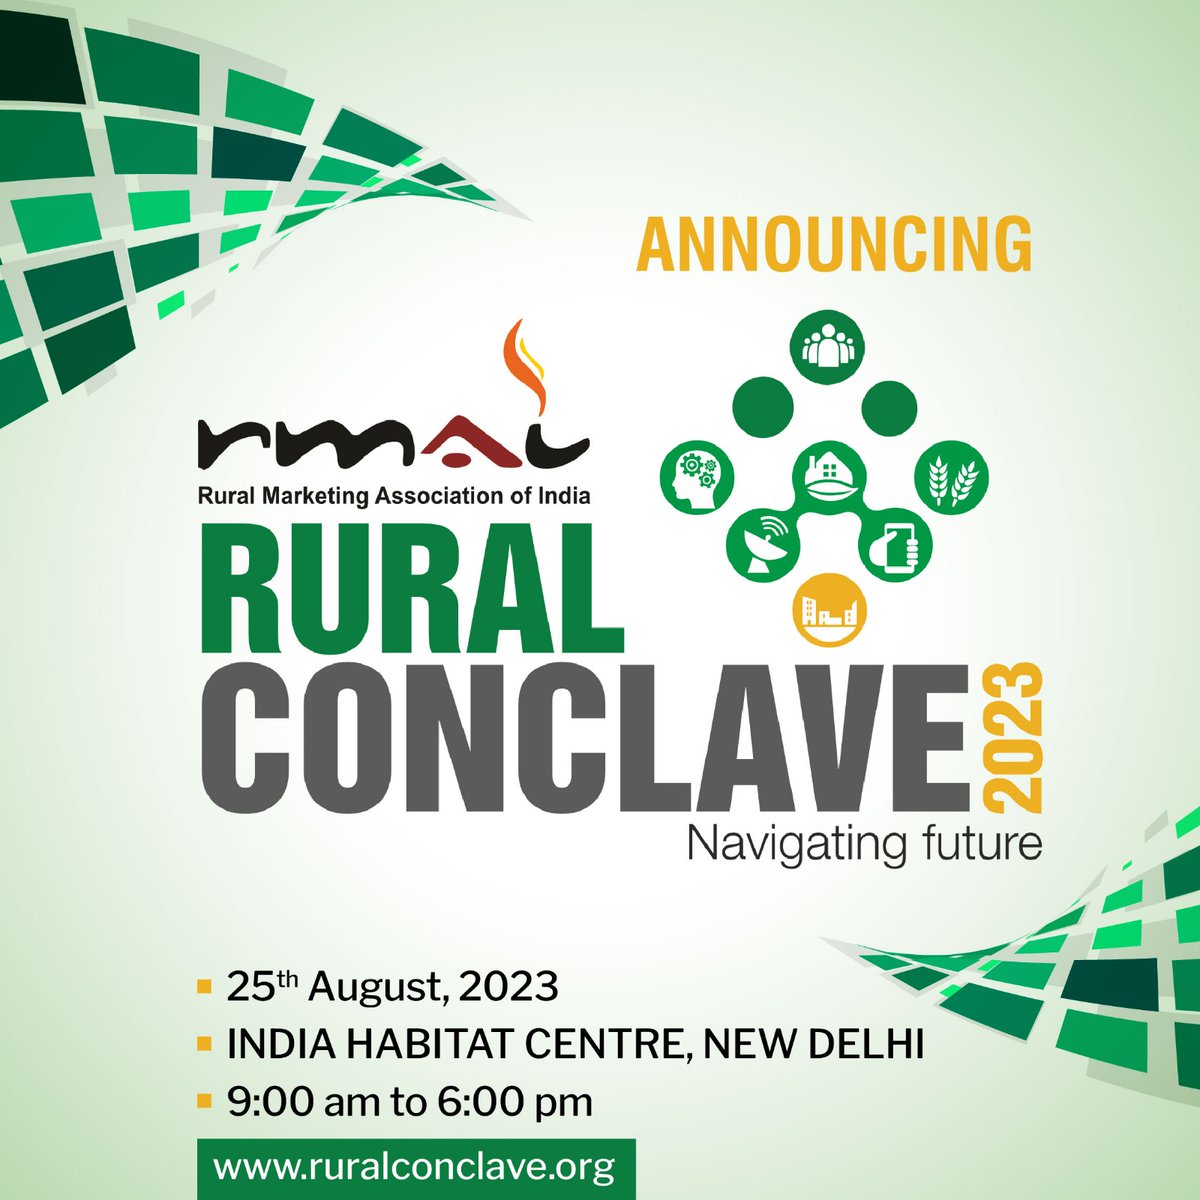 Welcome you all to the 4th edition of RURAL CONCLAVE 2023.
Enrich yourself with the thoughts and insights of great minds of rural marketing. Join us to get inspired!
Register here ruralconclave.org
#ruralconclave2023 #paneldiscussion #ruralinsights #delhievents